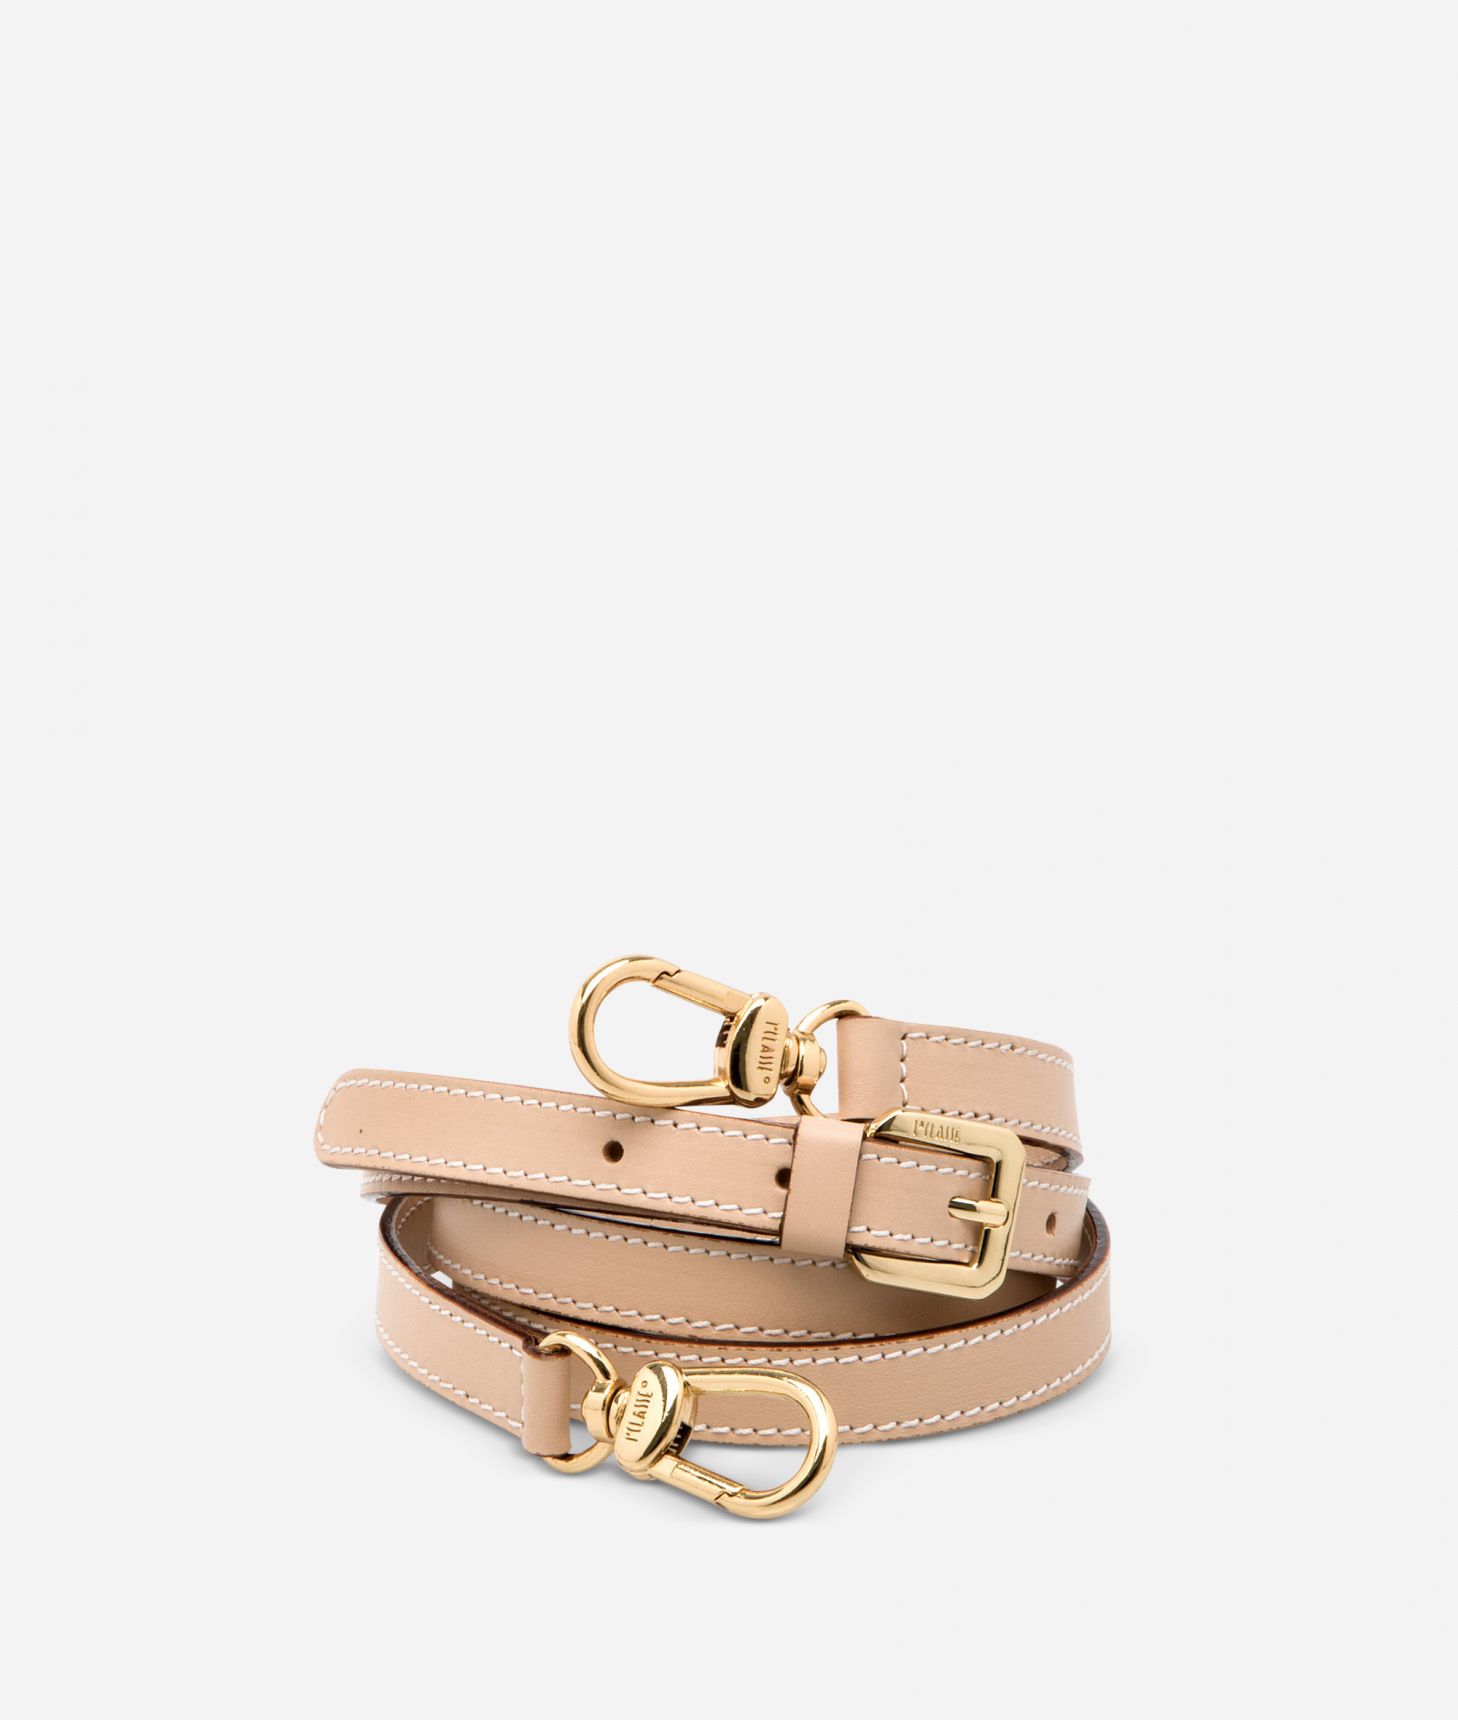 Adjustable strap in neutral-tone leather,front